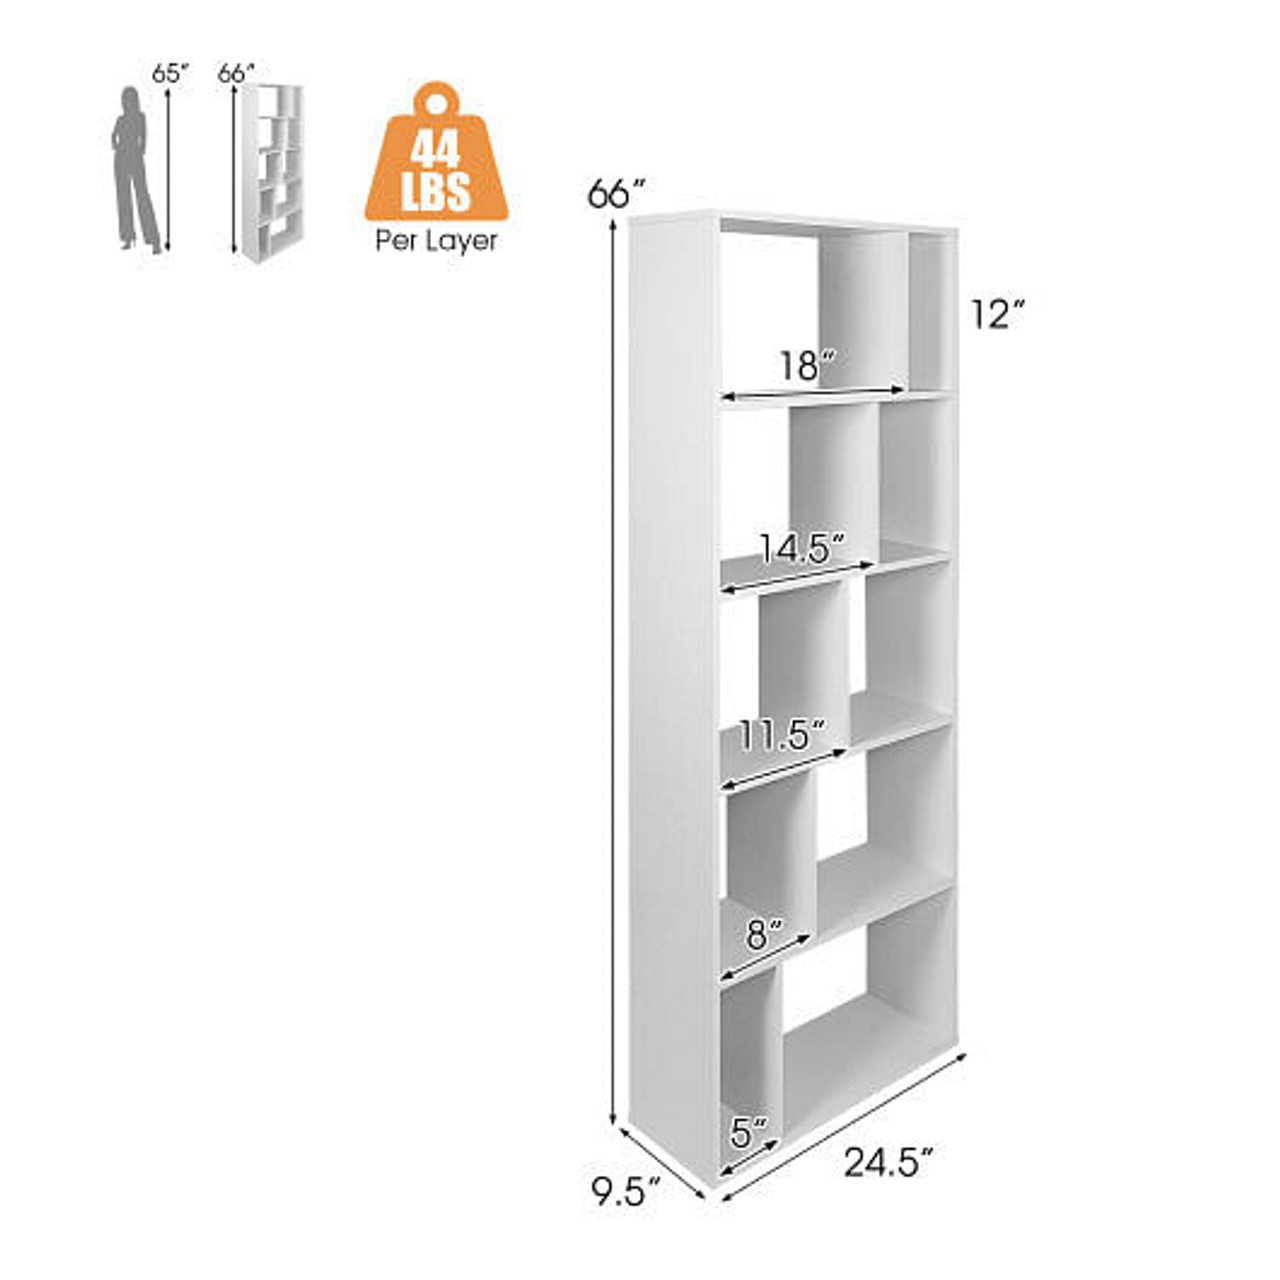 66 Inch Tall 5 Tiers Wood Bookshelf with 10 Open Compartments-White